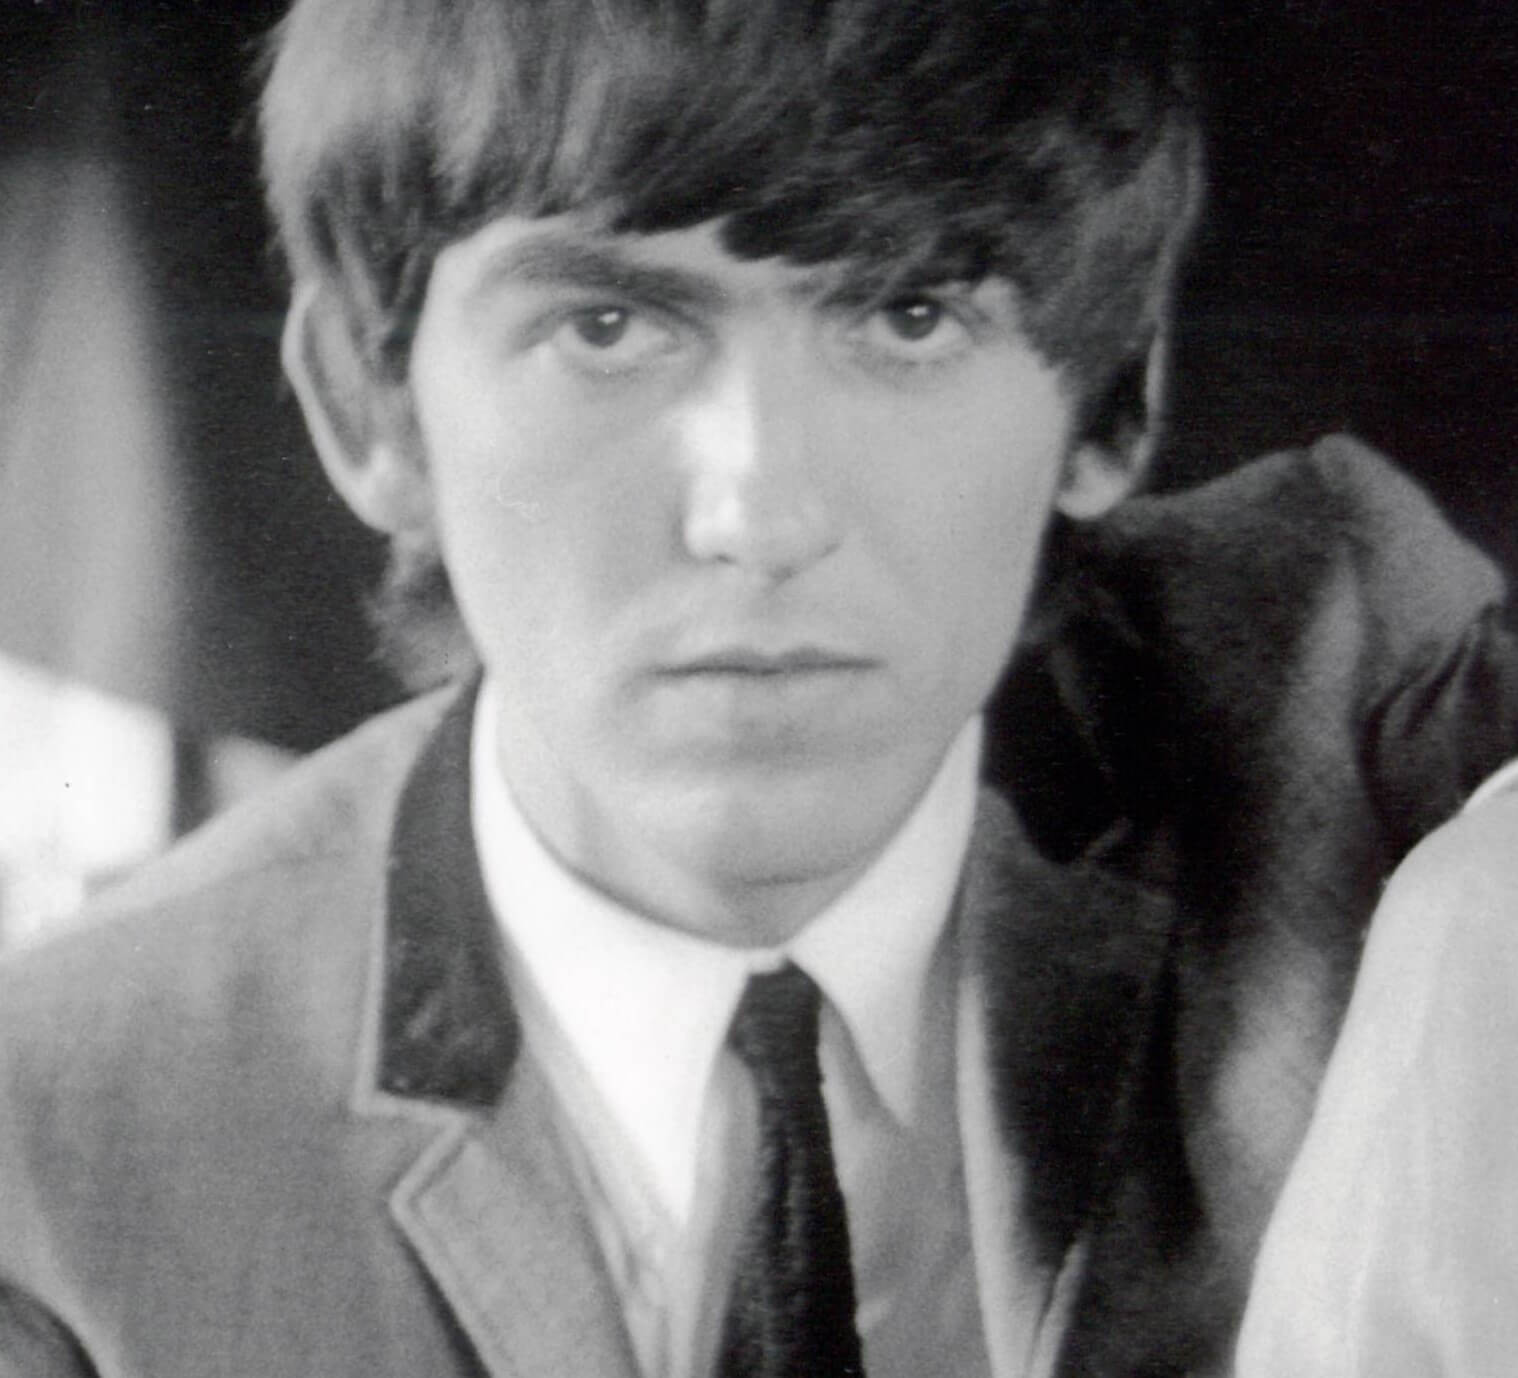 George Harrison in a suit